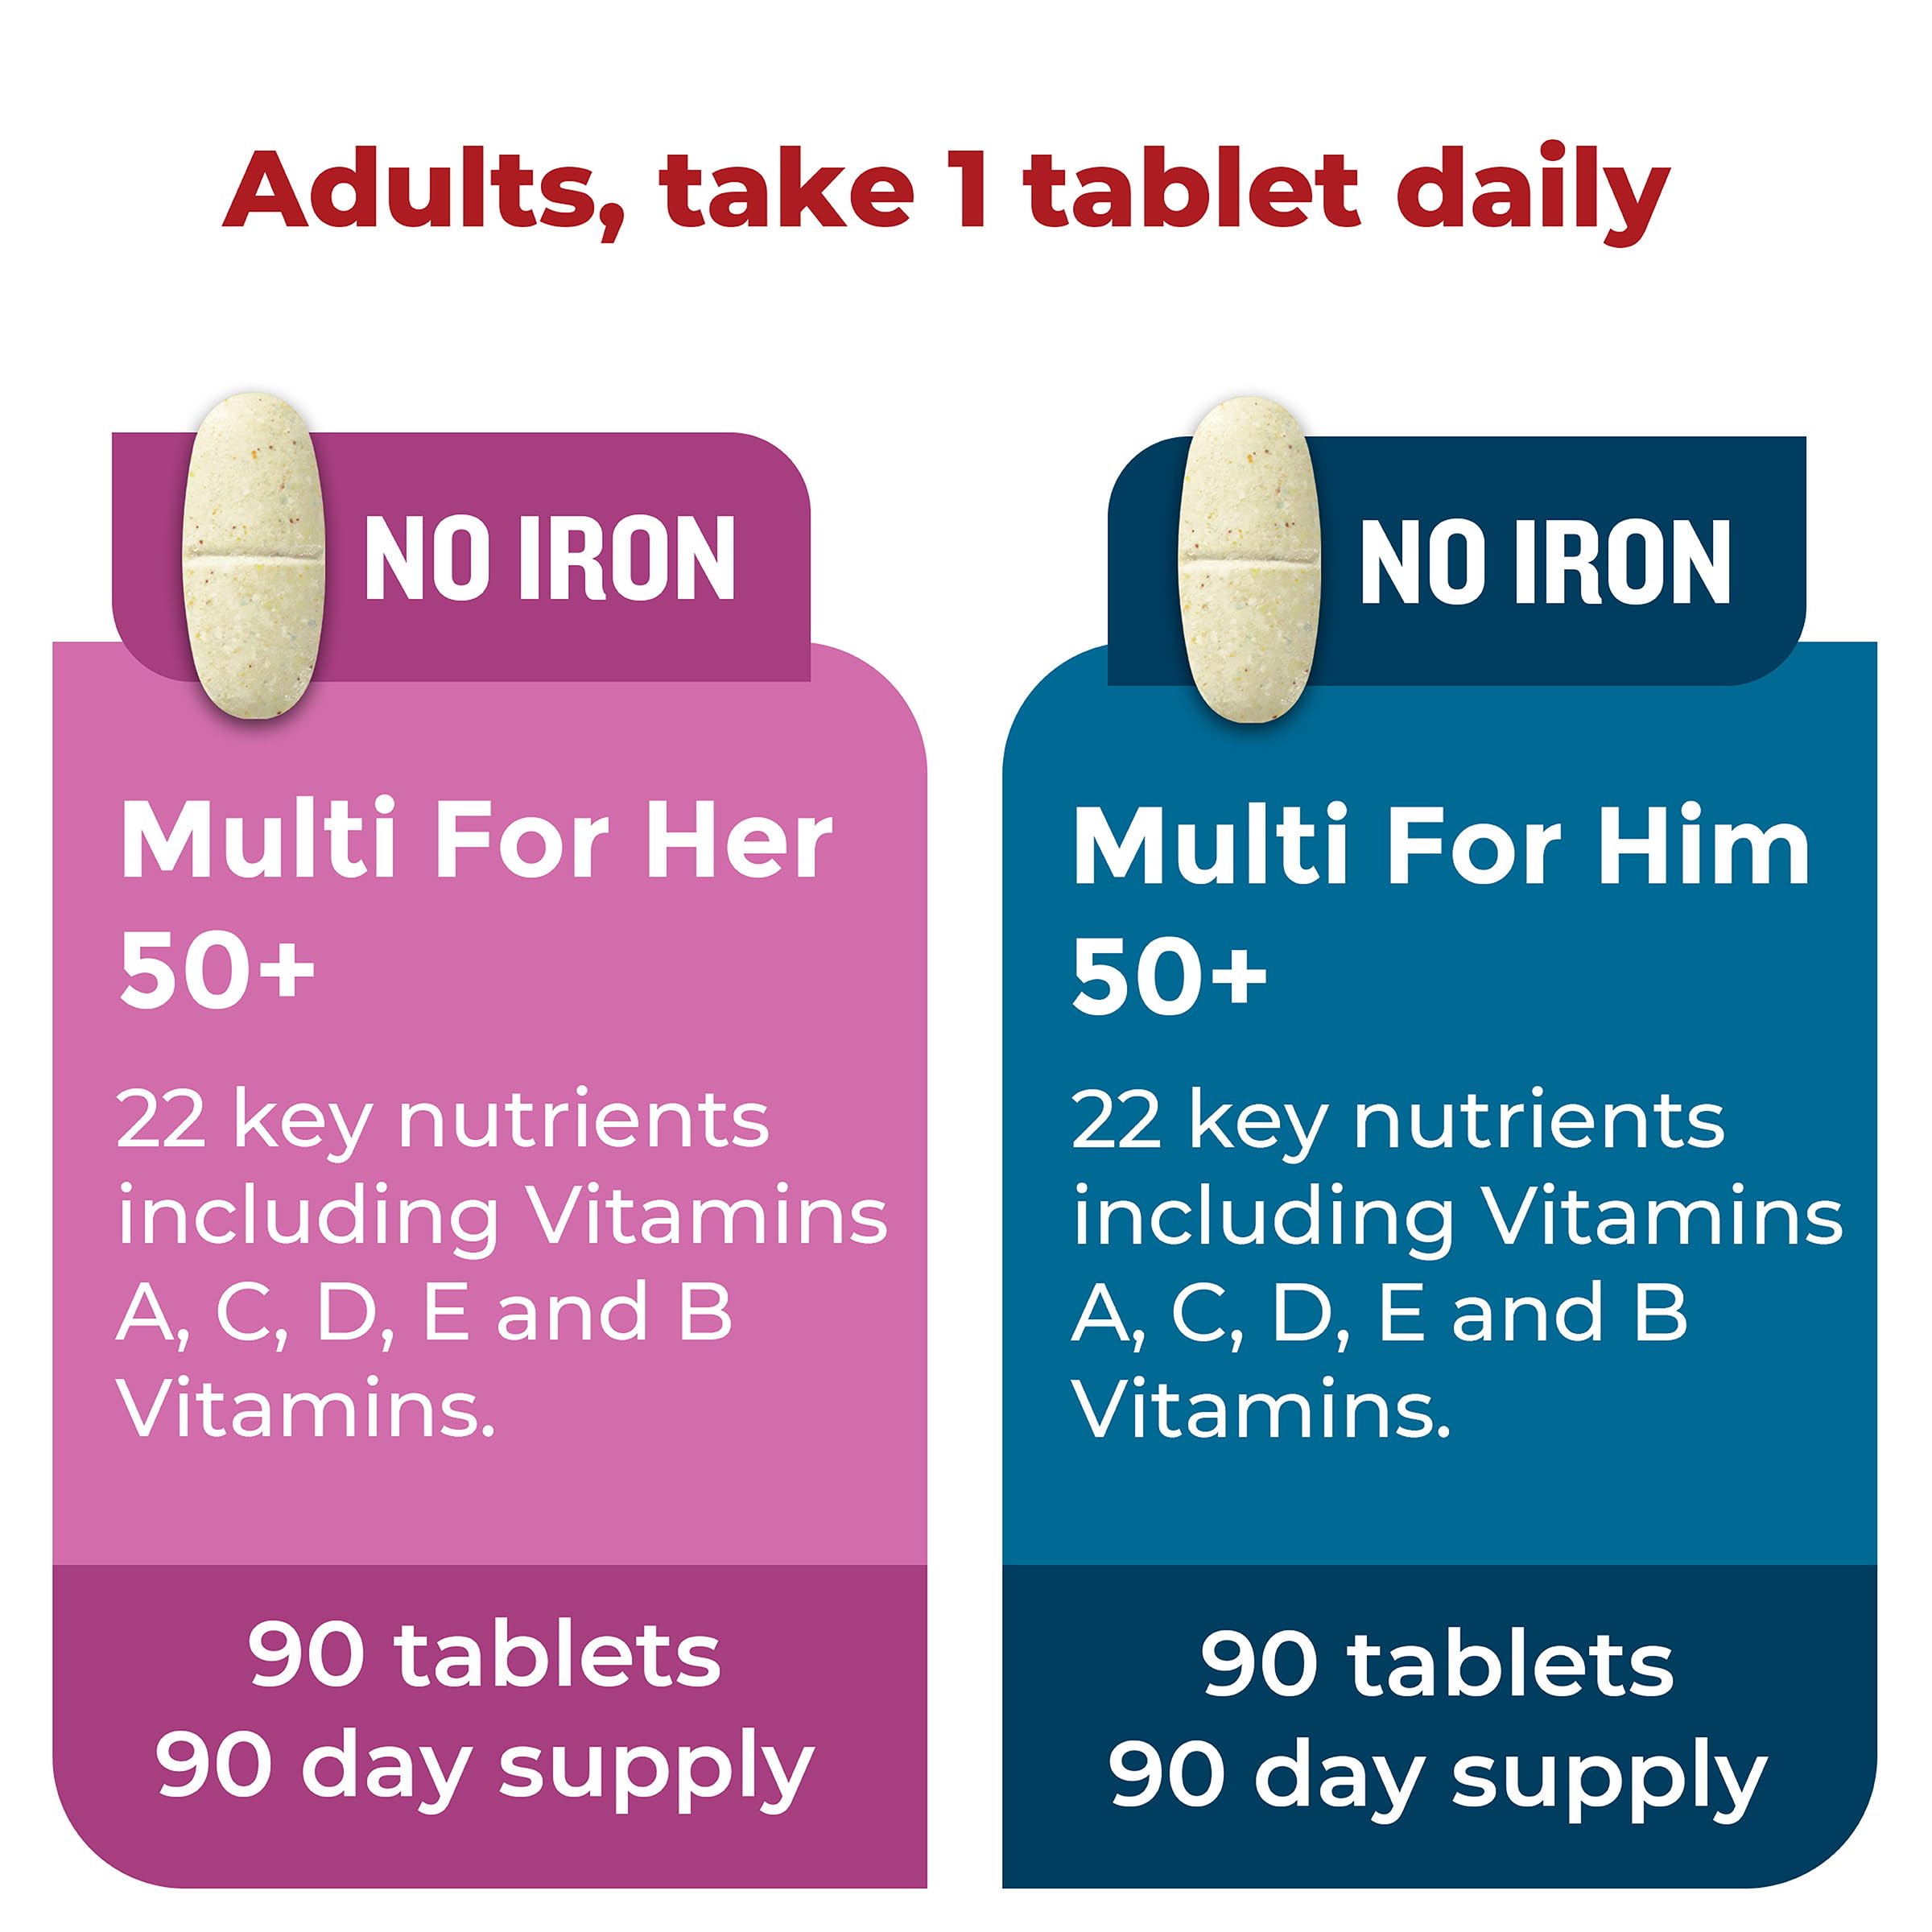 Nature Made Multivitamin 50+ His & Hers Combo Pack, Mens and Womens Multivitamin with Vitamin C, Vitamin D3, B Vitamins, Zinc & More, Two Multivitamin Bottles